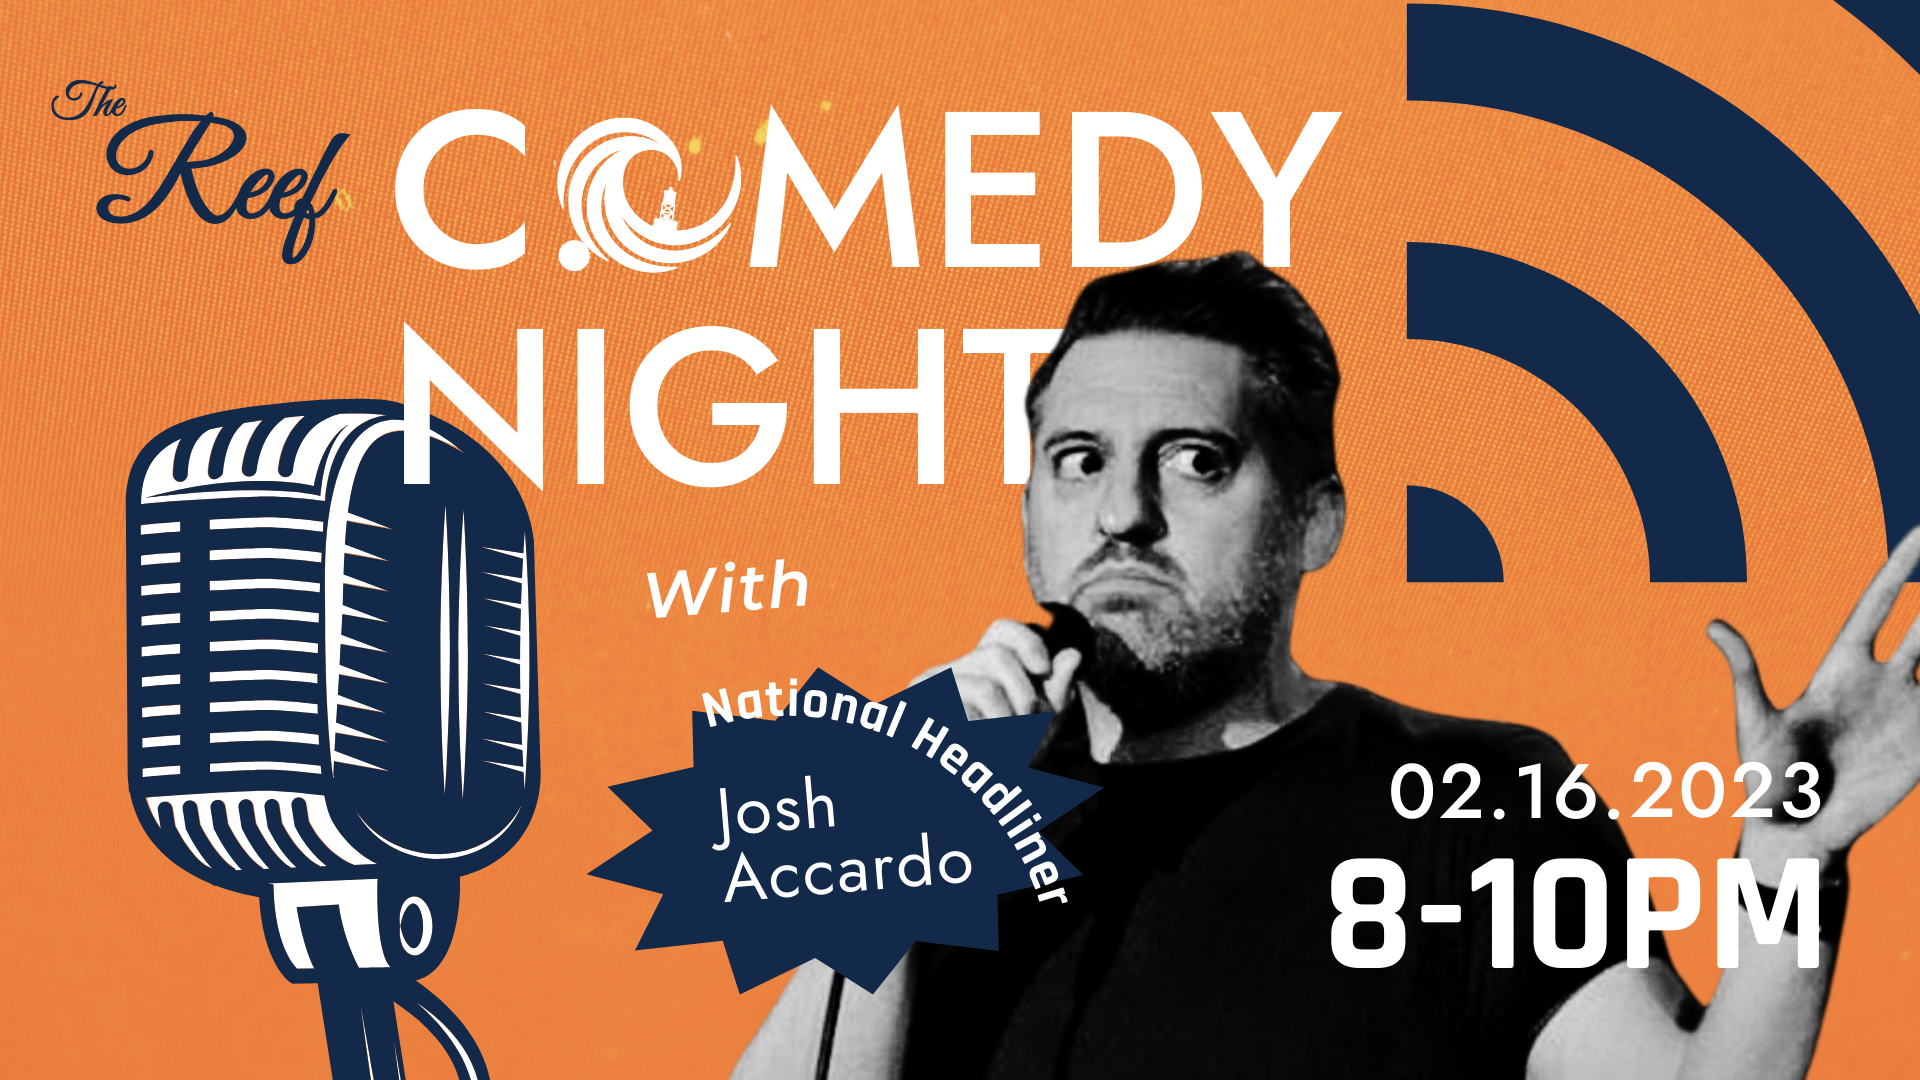 Comedy Night with National Headliner. Josh Accardo. Get ready to burst into laughter at the uproarious Comedy Night featuring the one and only Josh Accardo! Join us at The Reef for an evening brimming with non-stop amusement and side-splitting jokes.